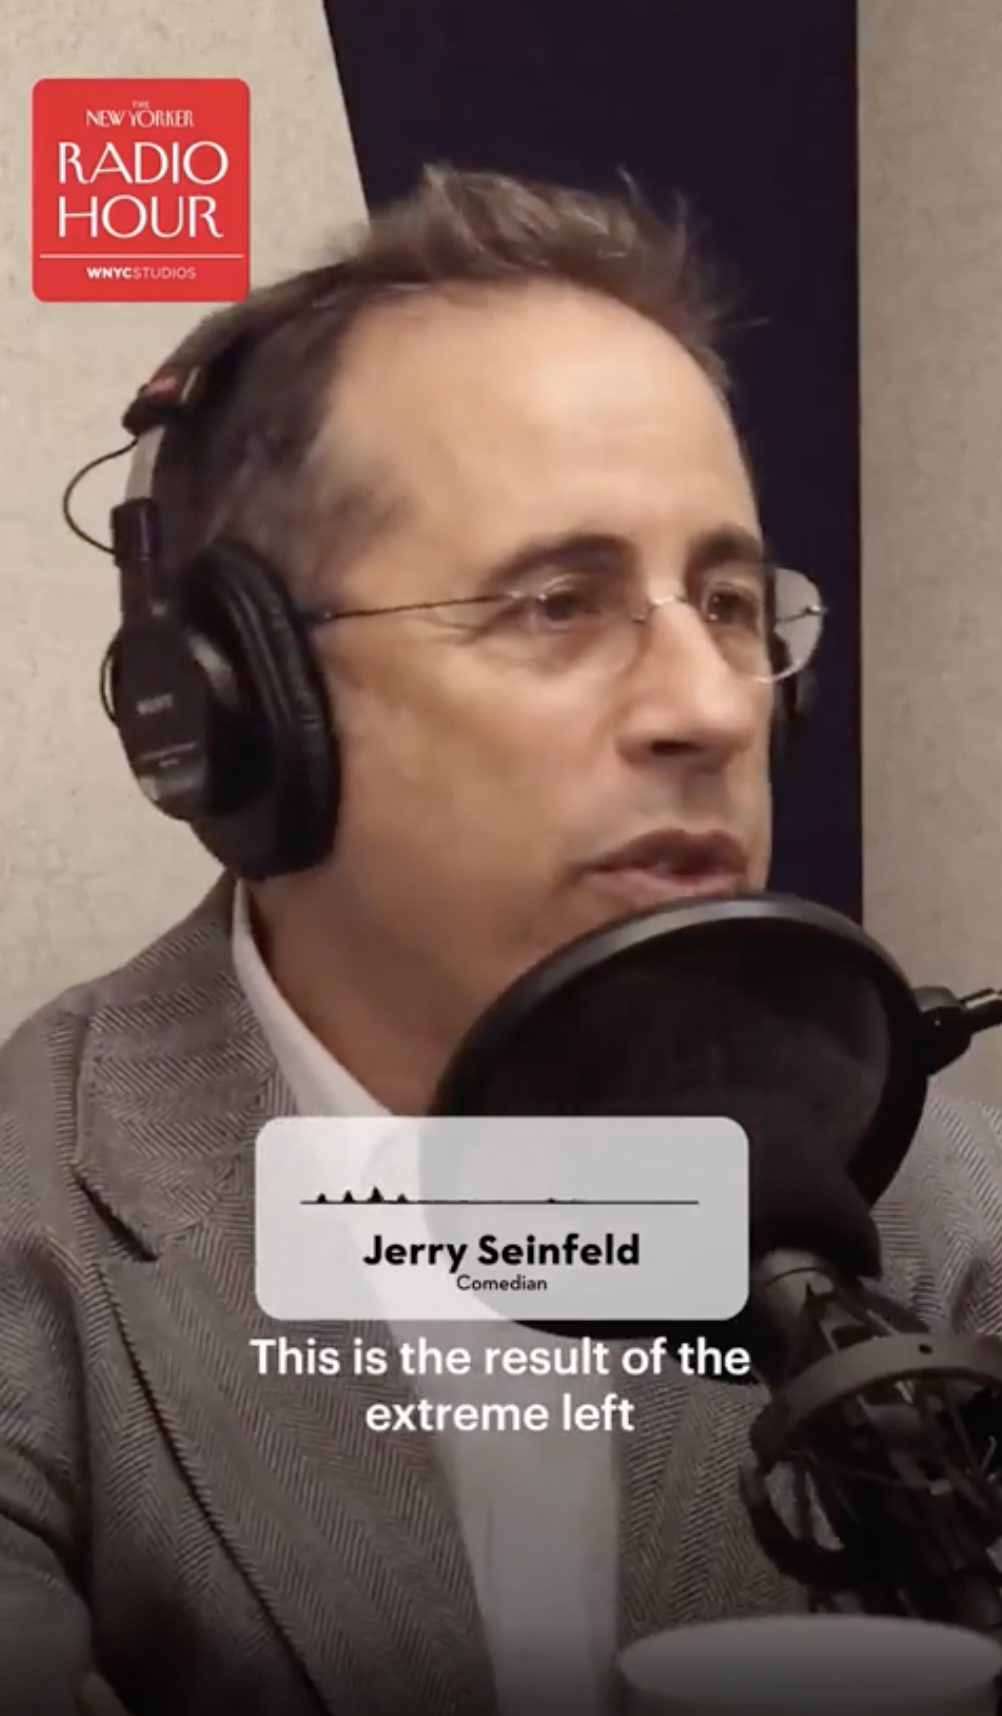 photo caption - New Radio Hour Jerry Seinfeld Comedian This is the result of the extreme left